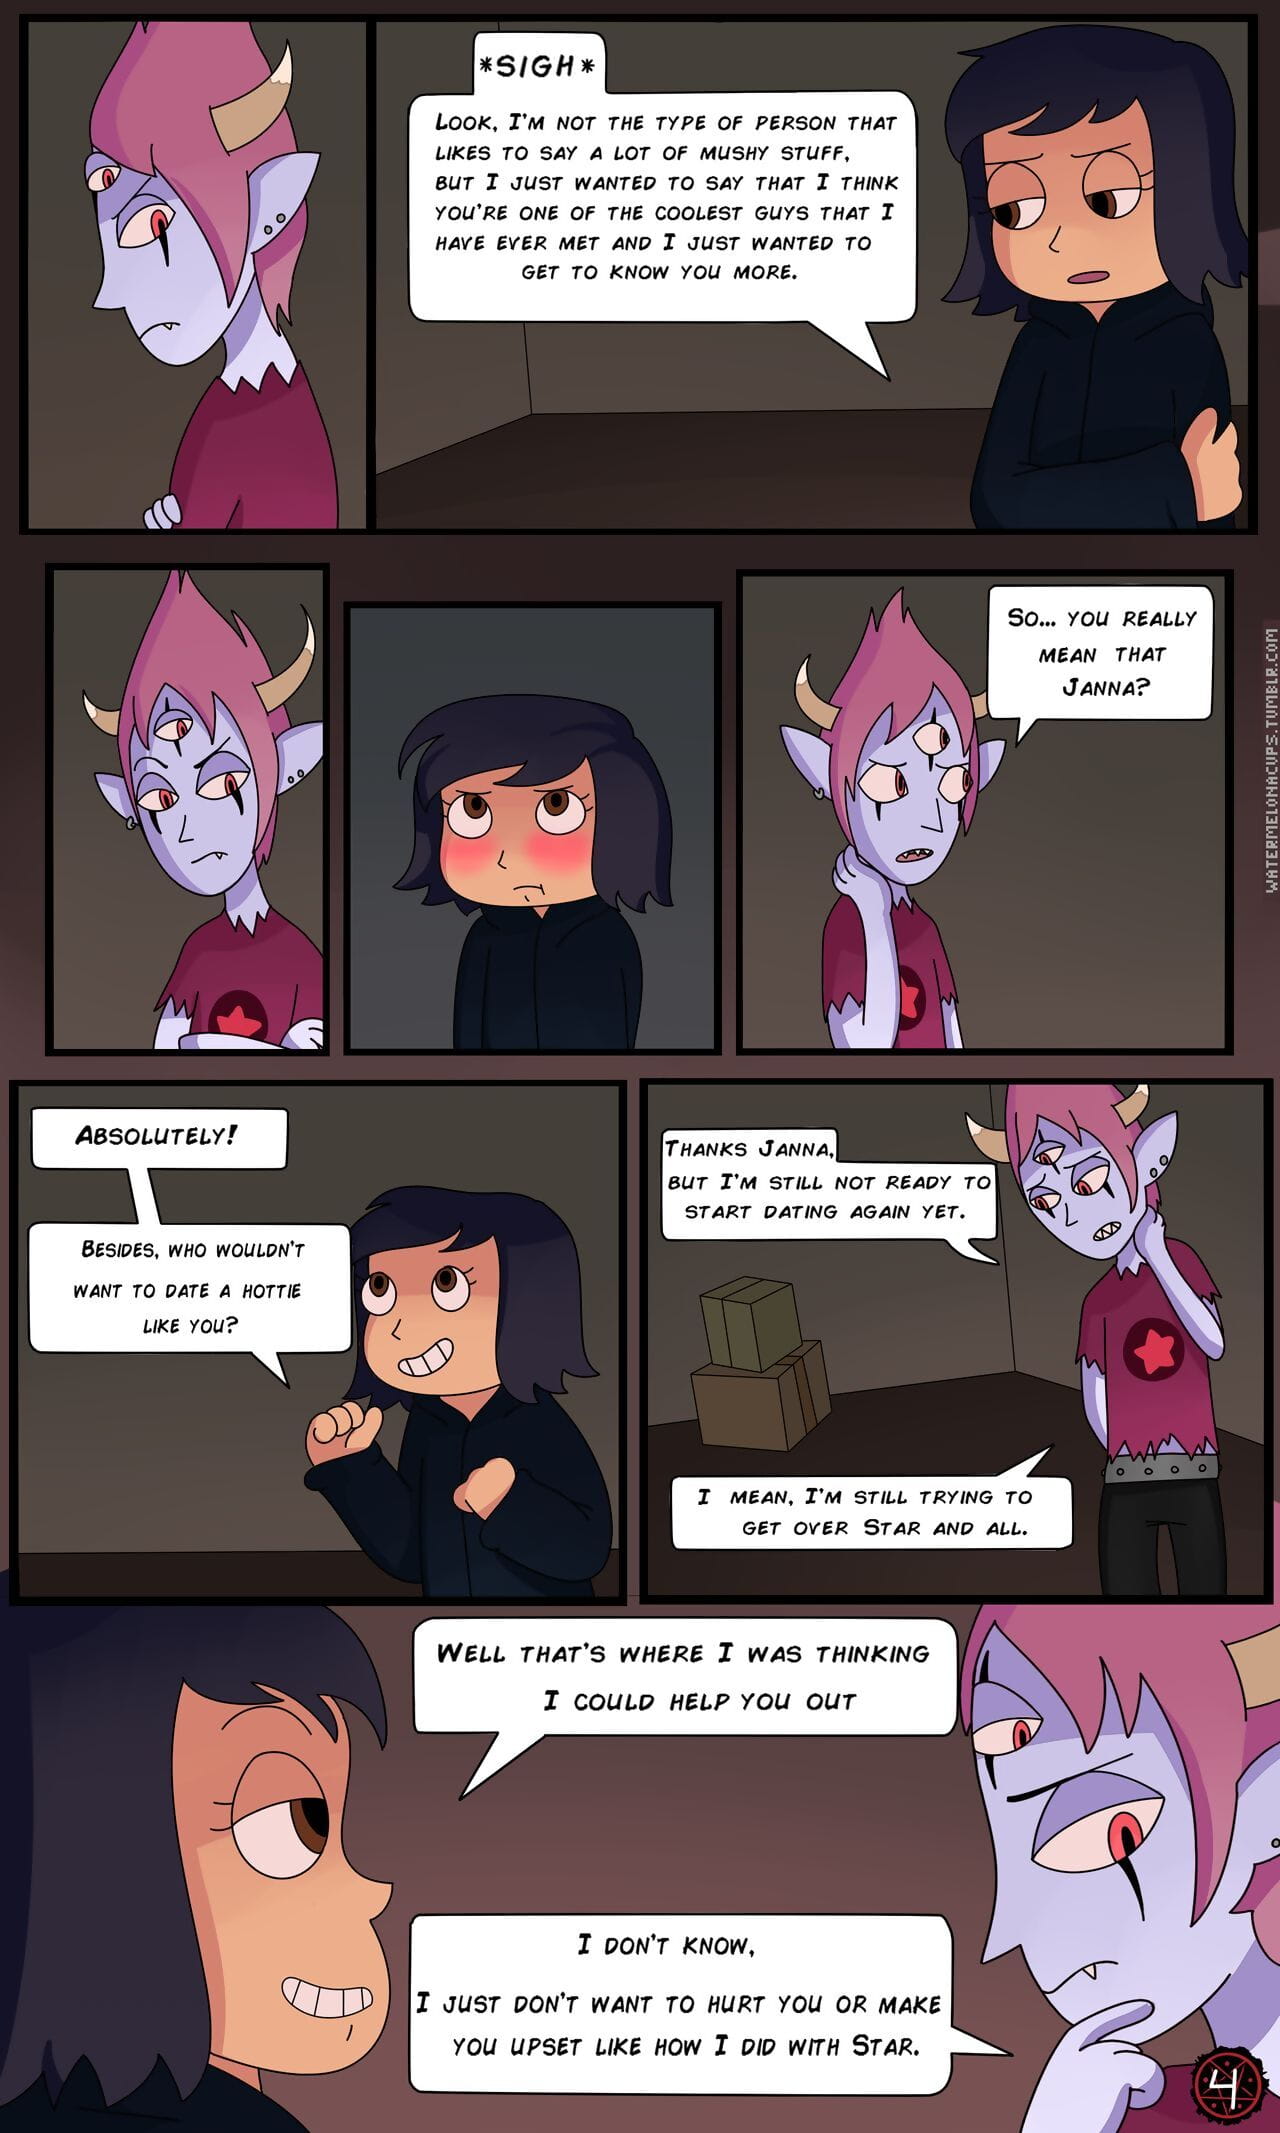 Star Vs. The Forces of Evil- Your Wish Is My Command page 1